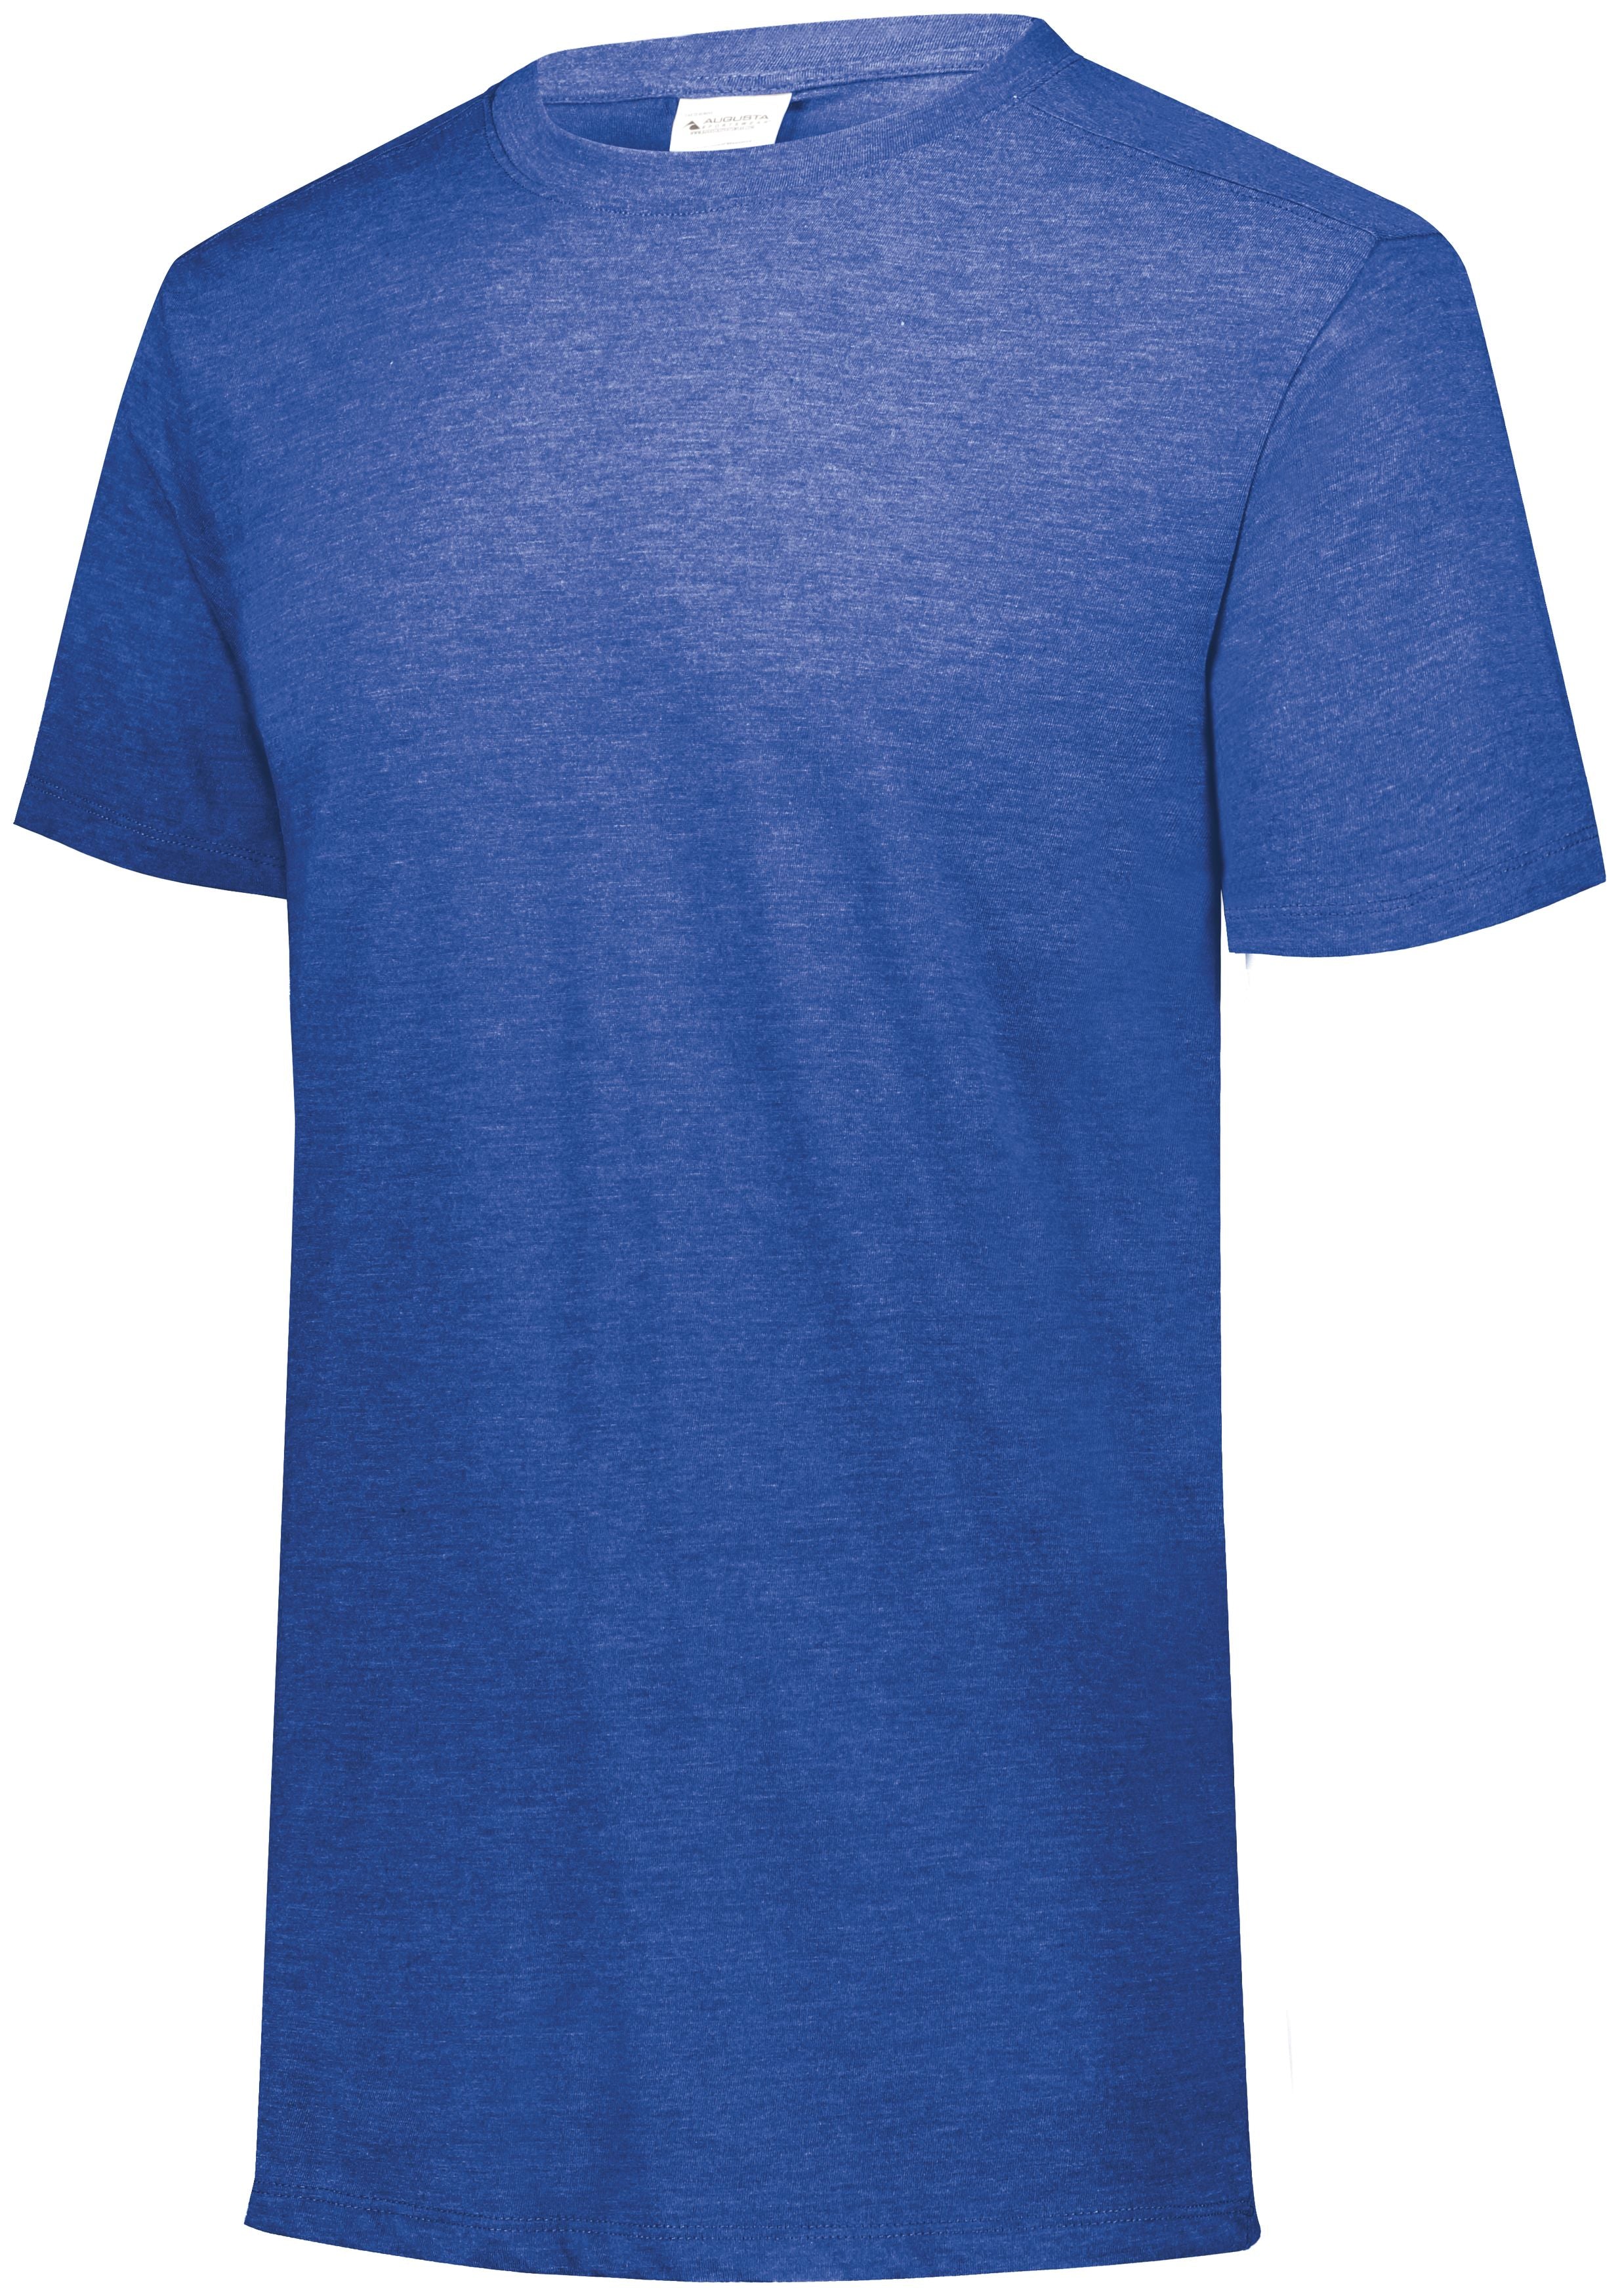 Augusta Sportswear Tri-Blend T-Shirt in Royal Heather  -Part of the Adult, Adult-Tee-Shirt, T-Shirts, Augusta-Products, Shirts product lines at KanaleyCreations.com